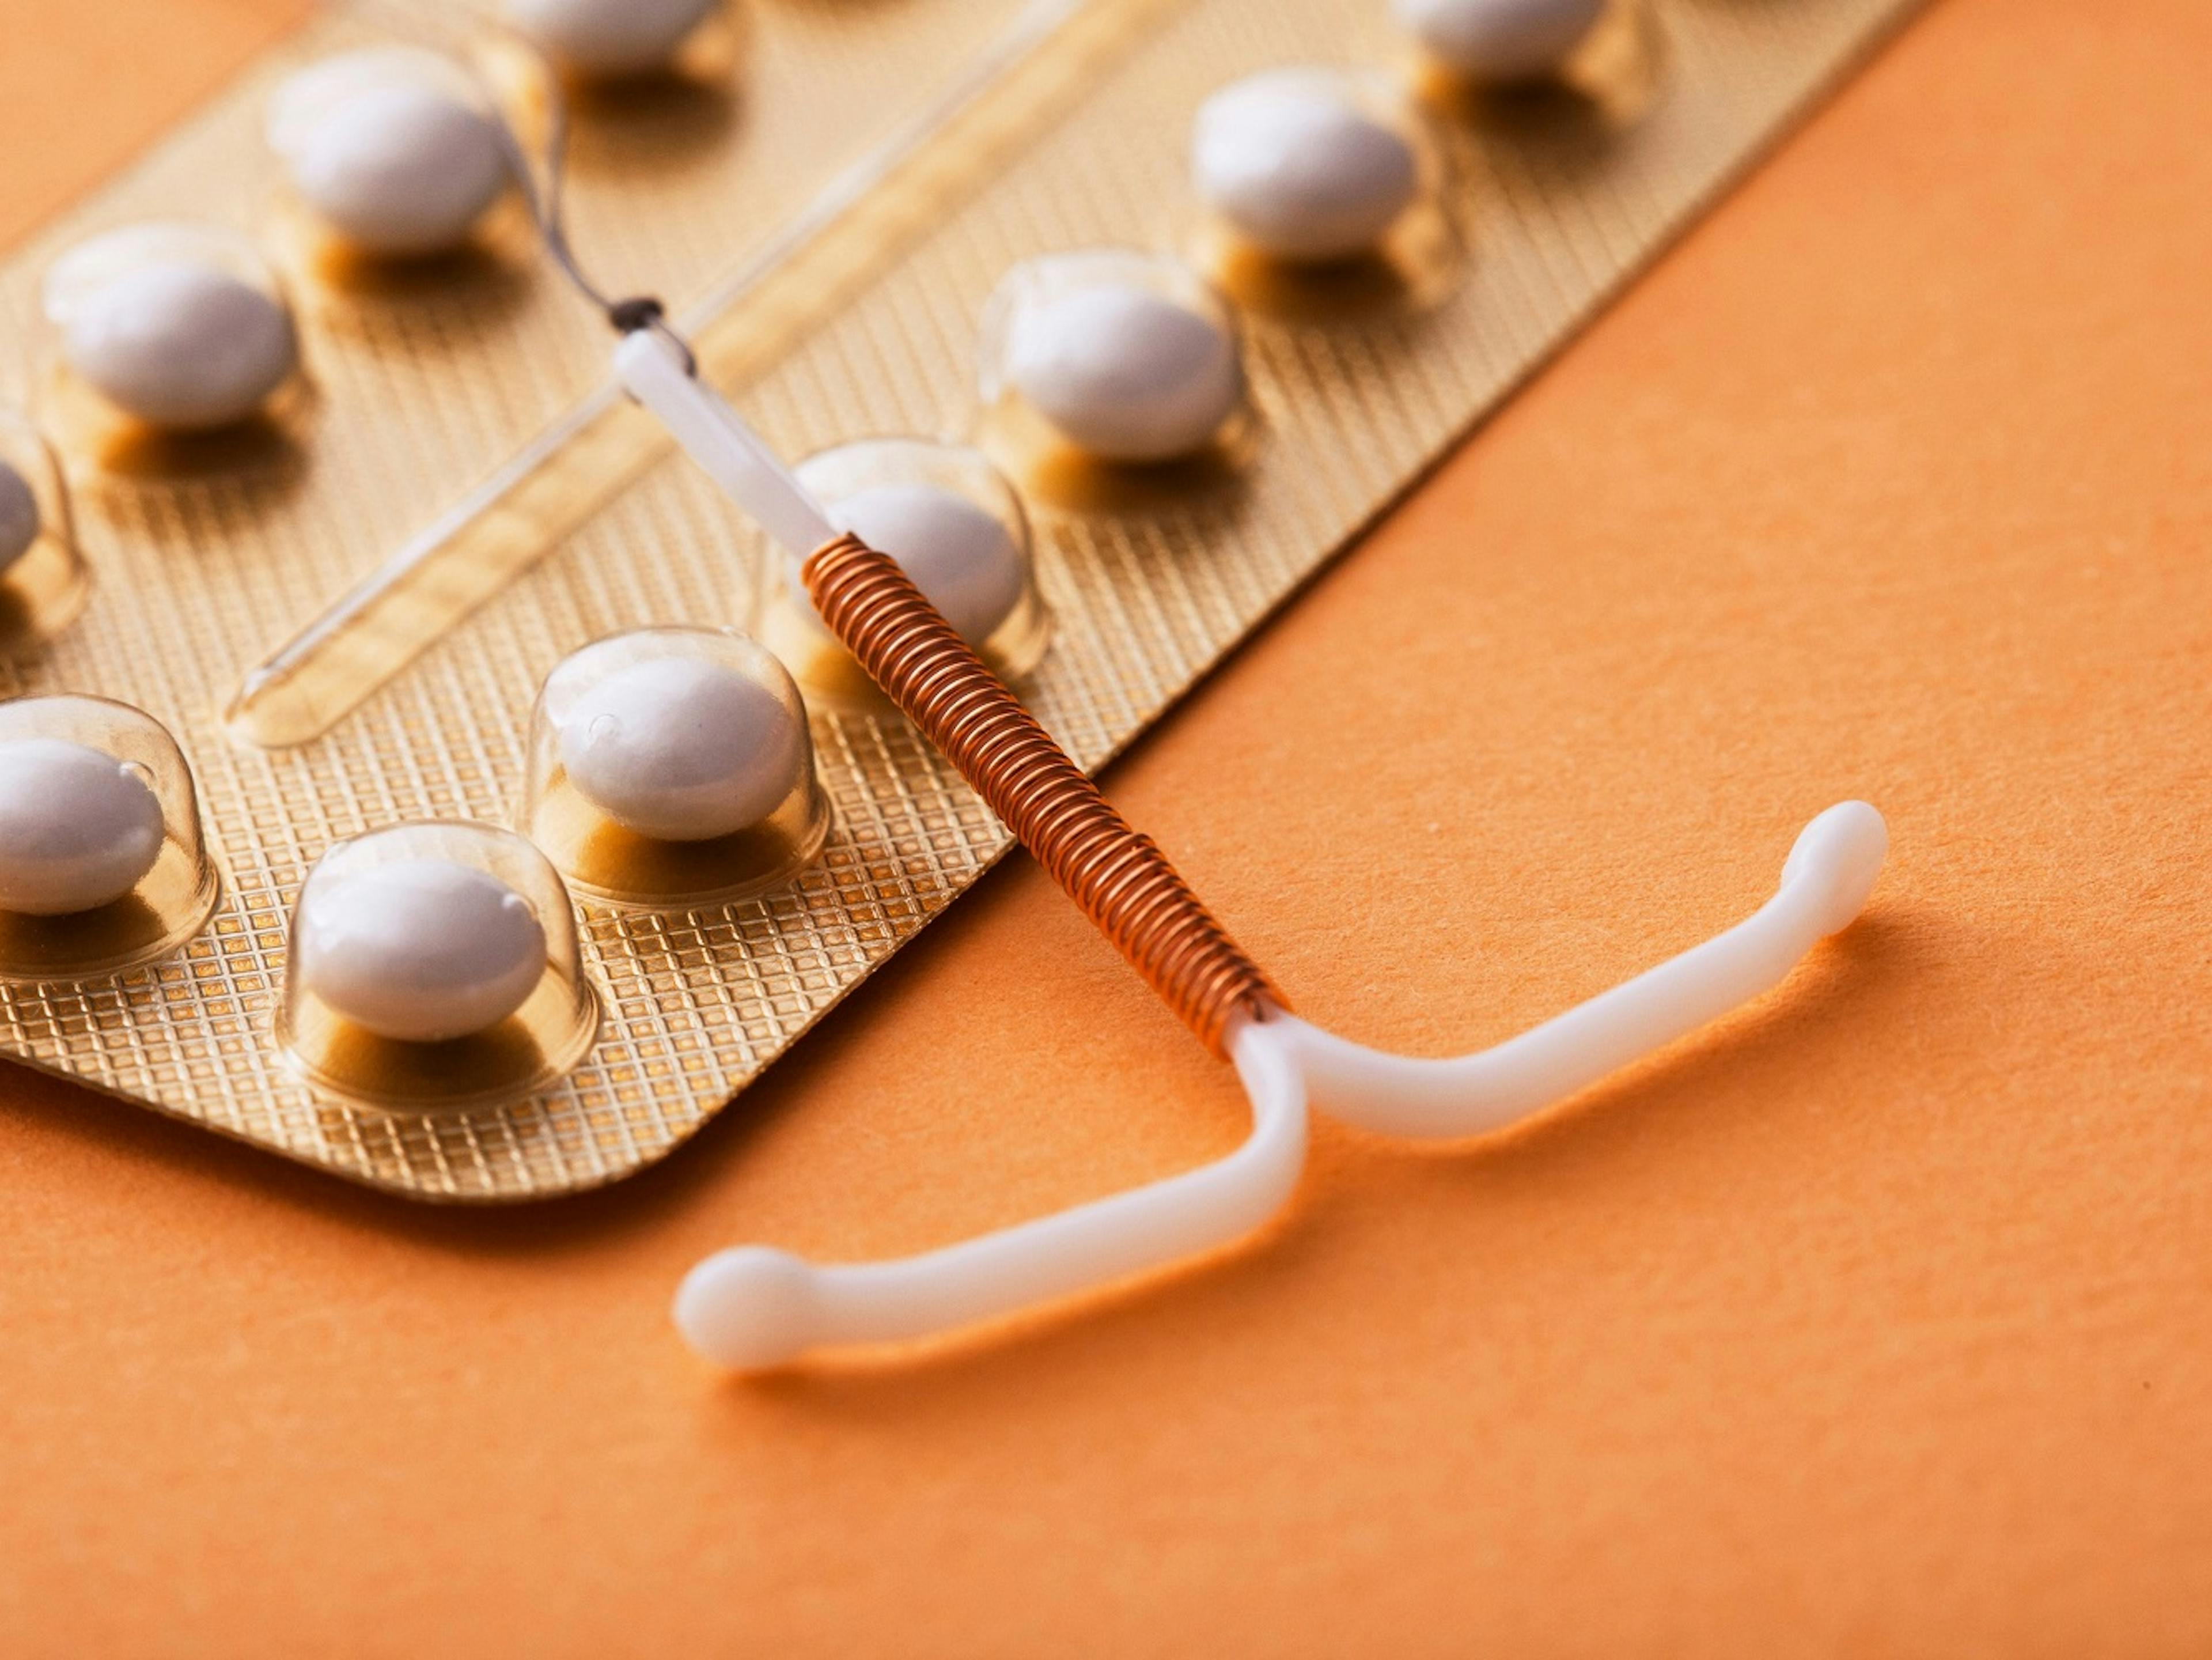 Does Medicare Cover Birth Control?